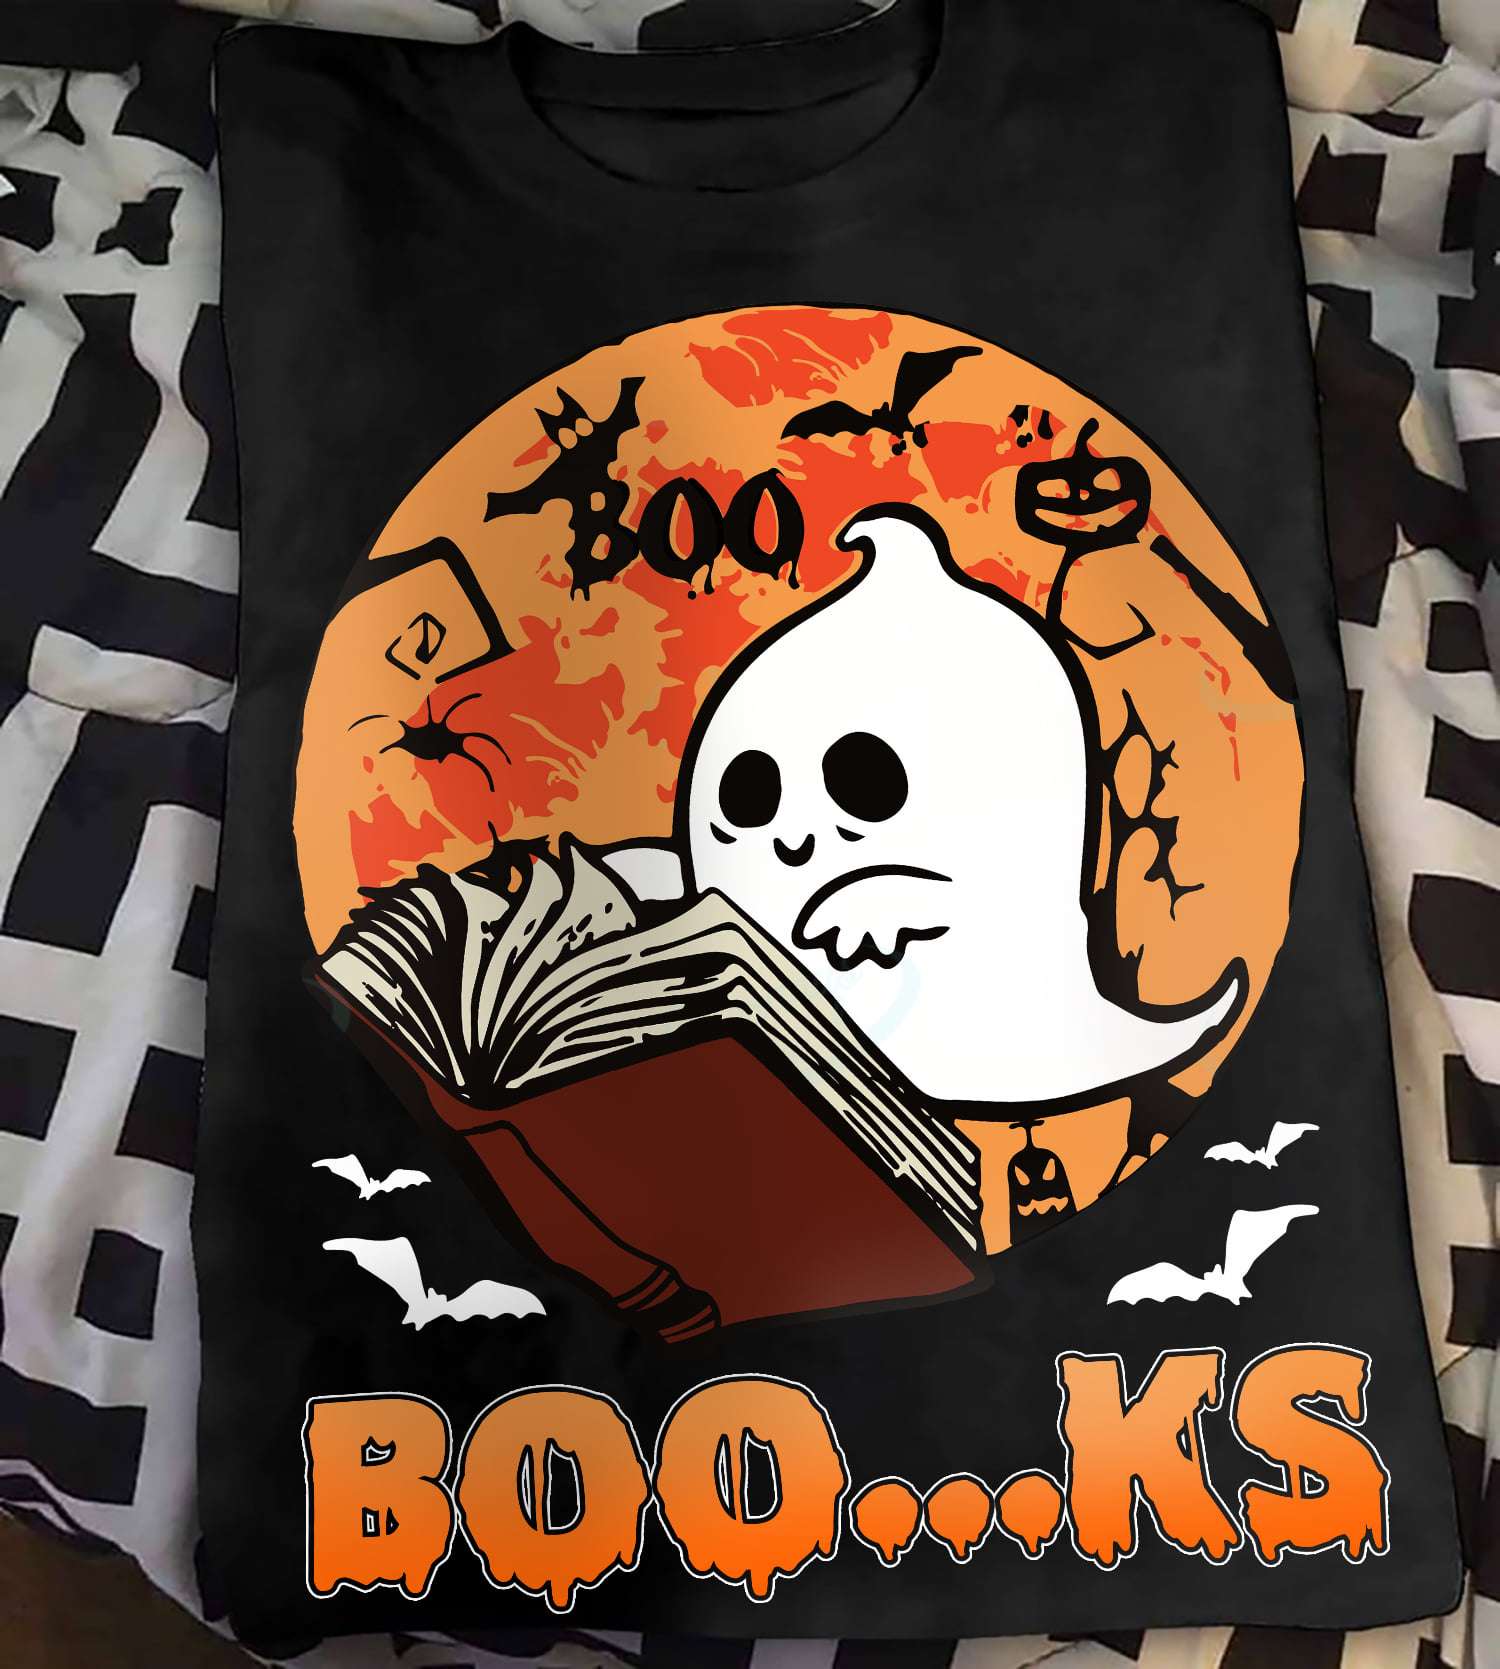 Books ghost - White ghost reading books, halloween ghost costume